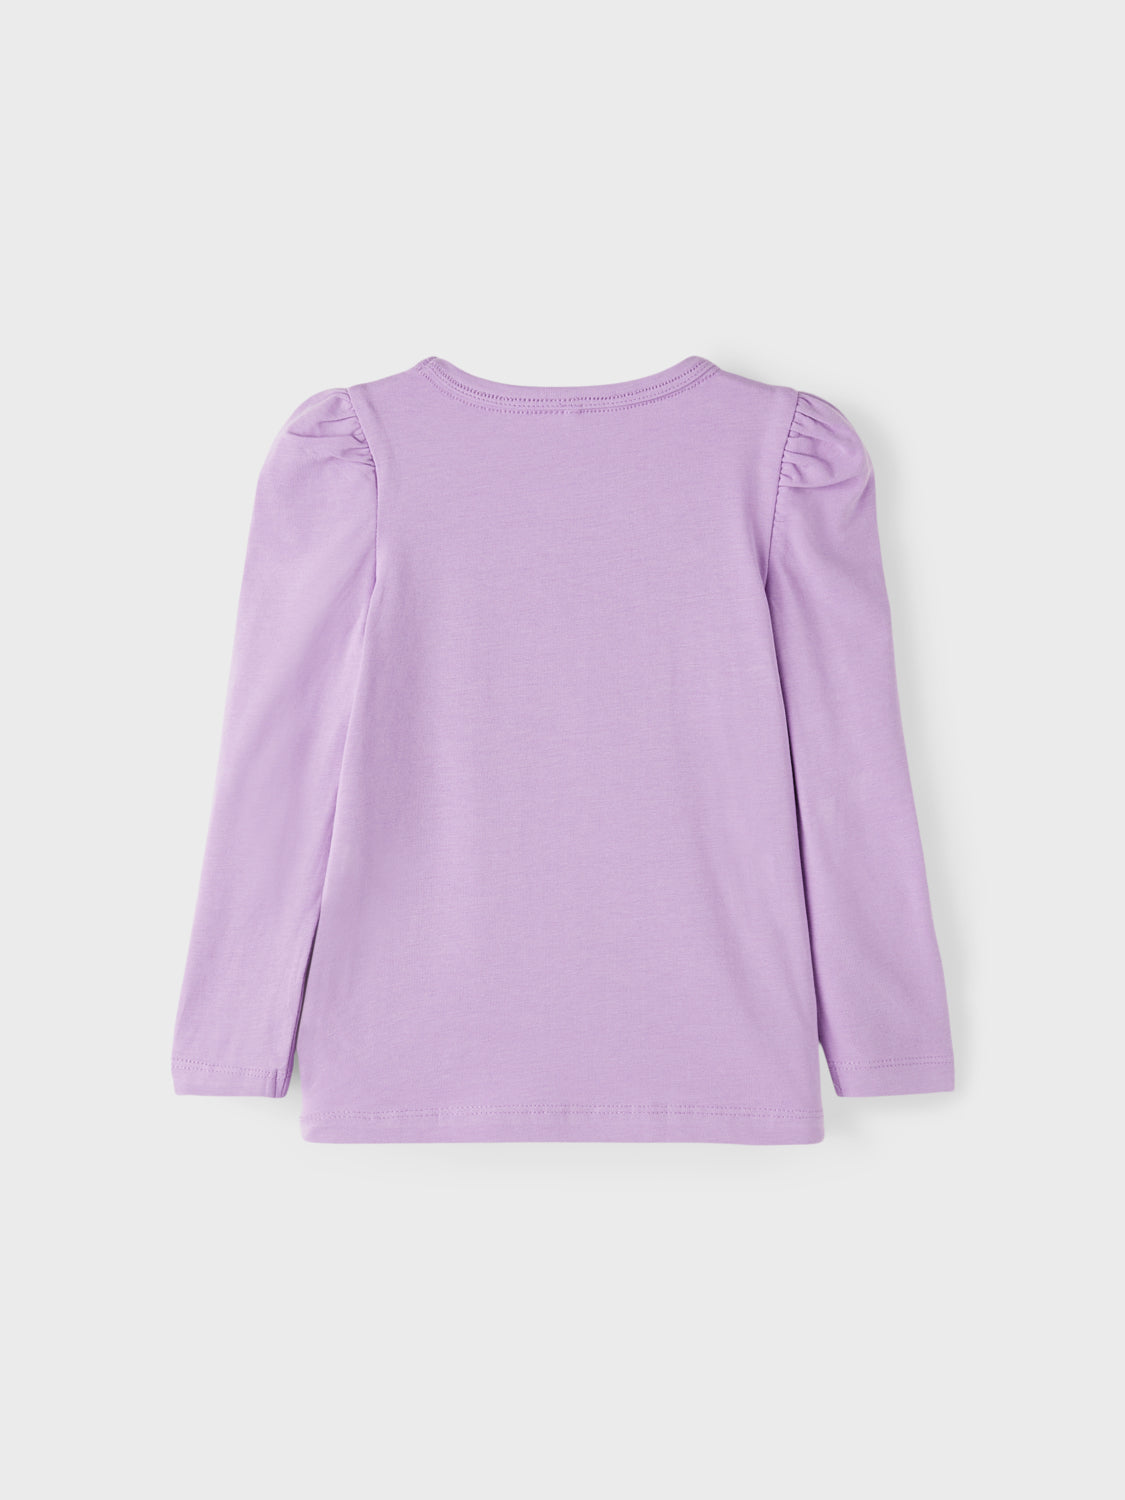 NMFRIKKY T-shirts & Tops - Bougainvillea